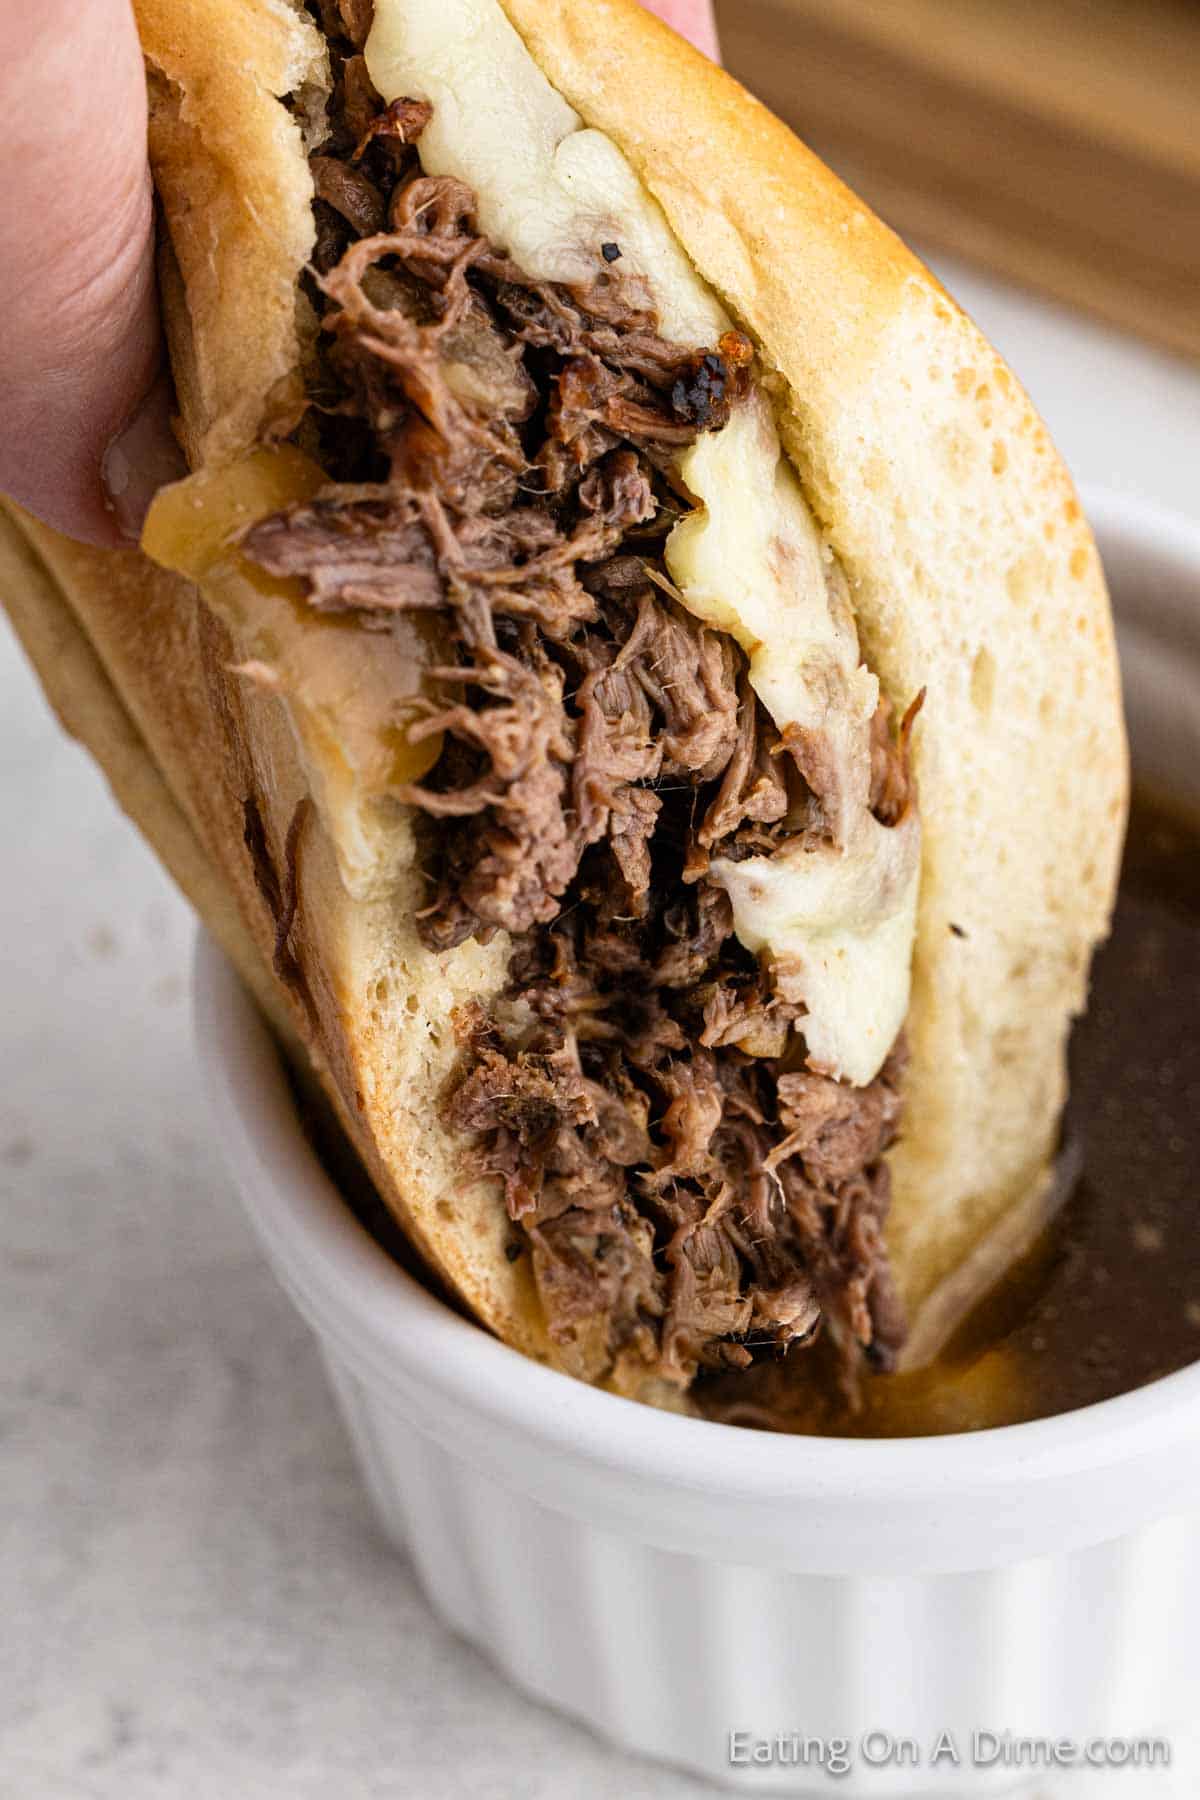 shredded beef dipping into sauce